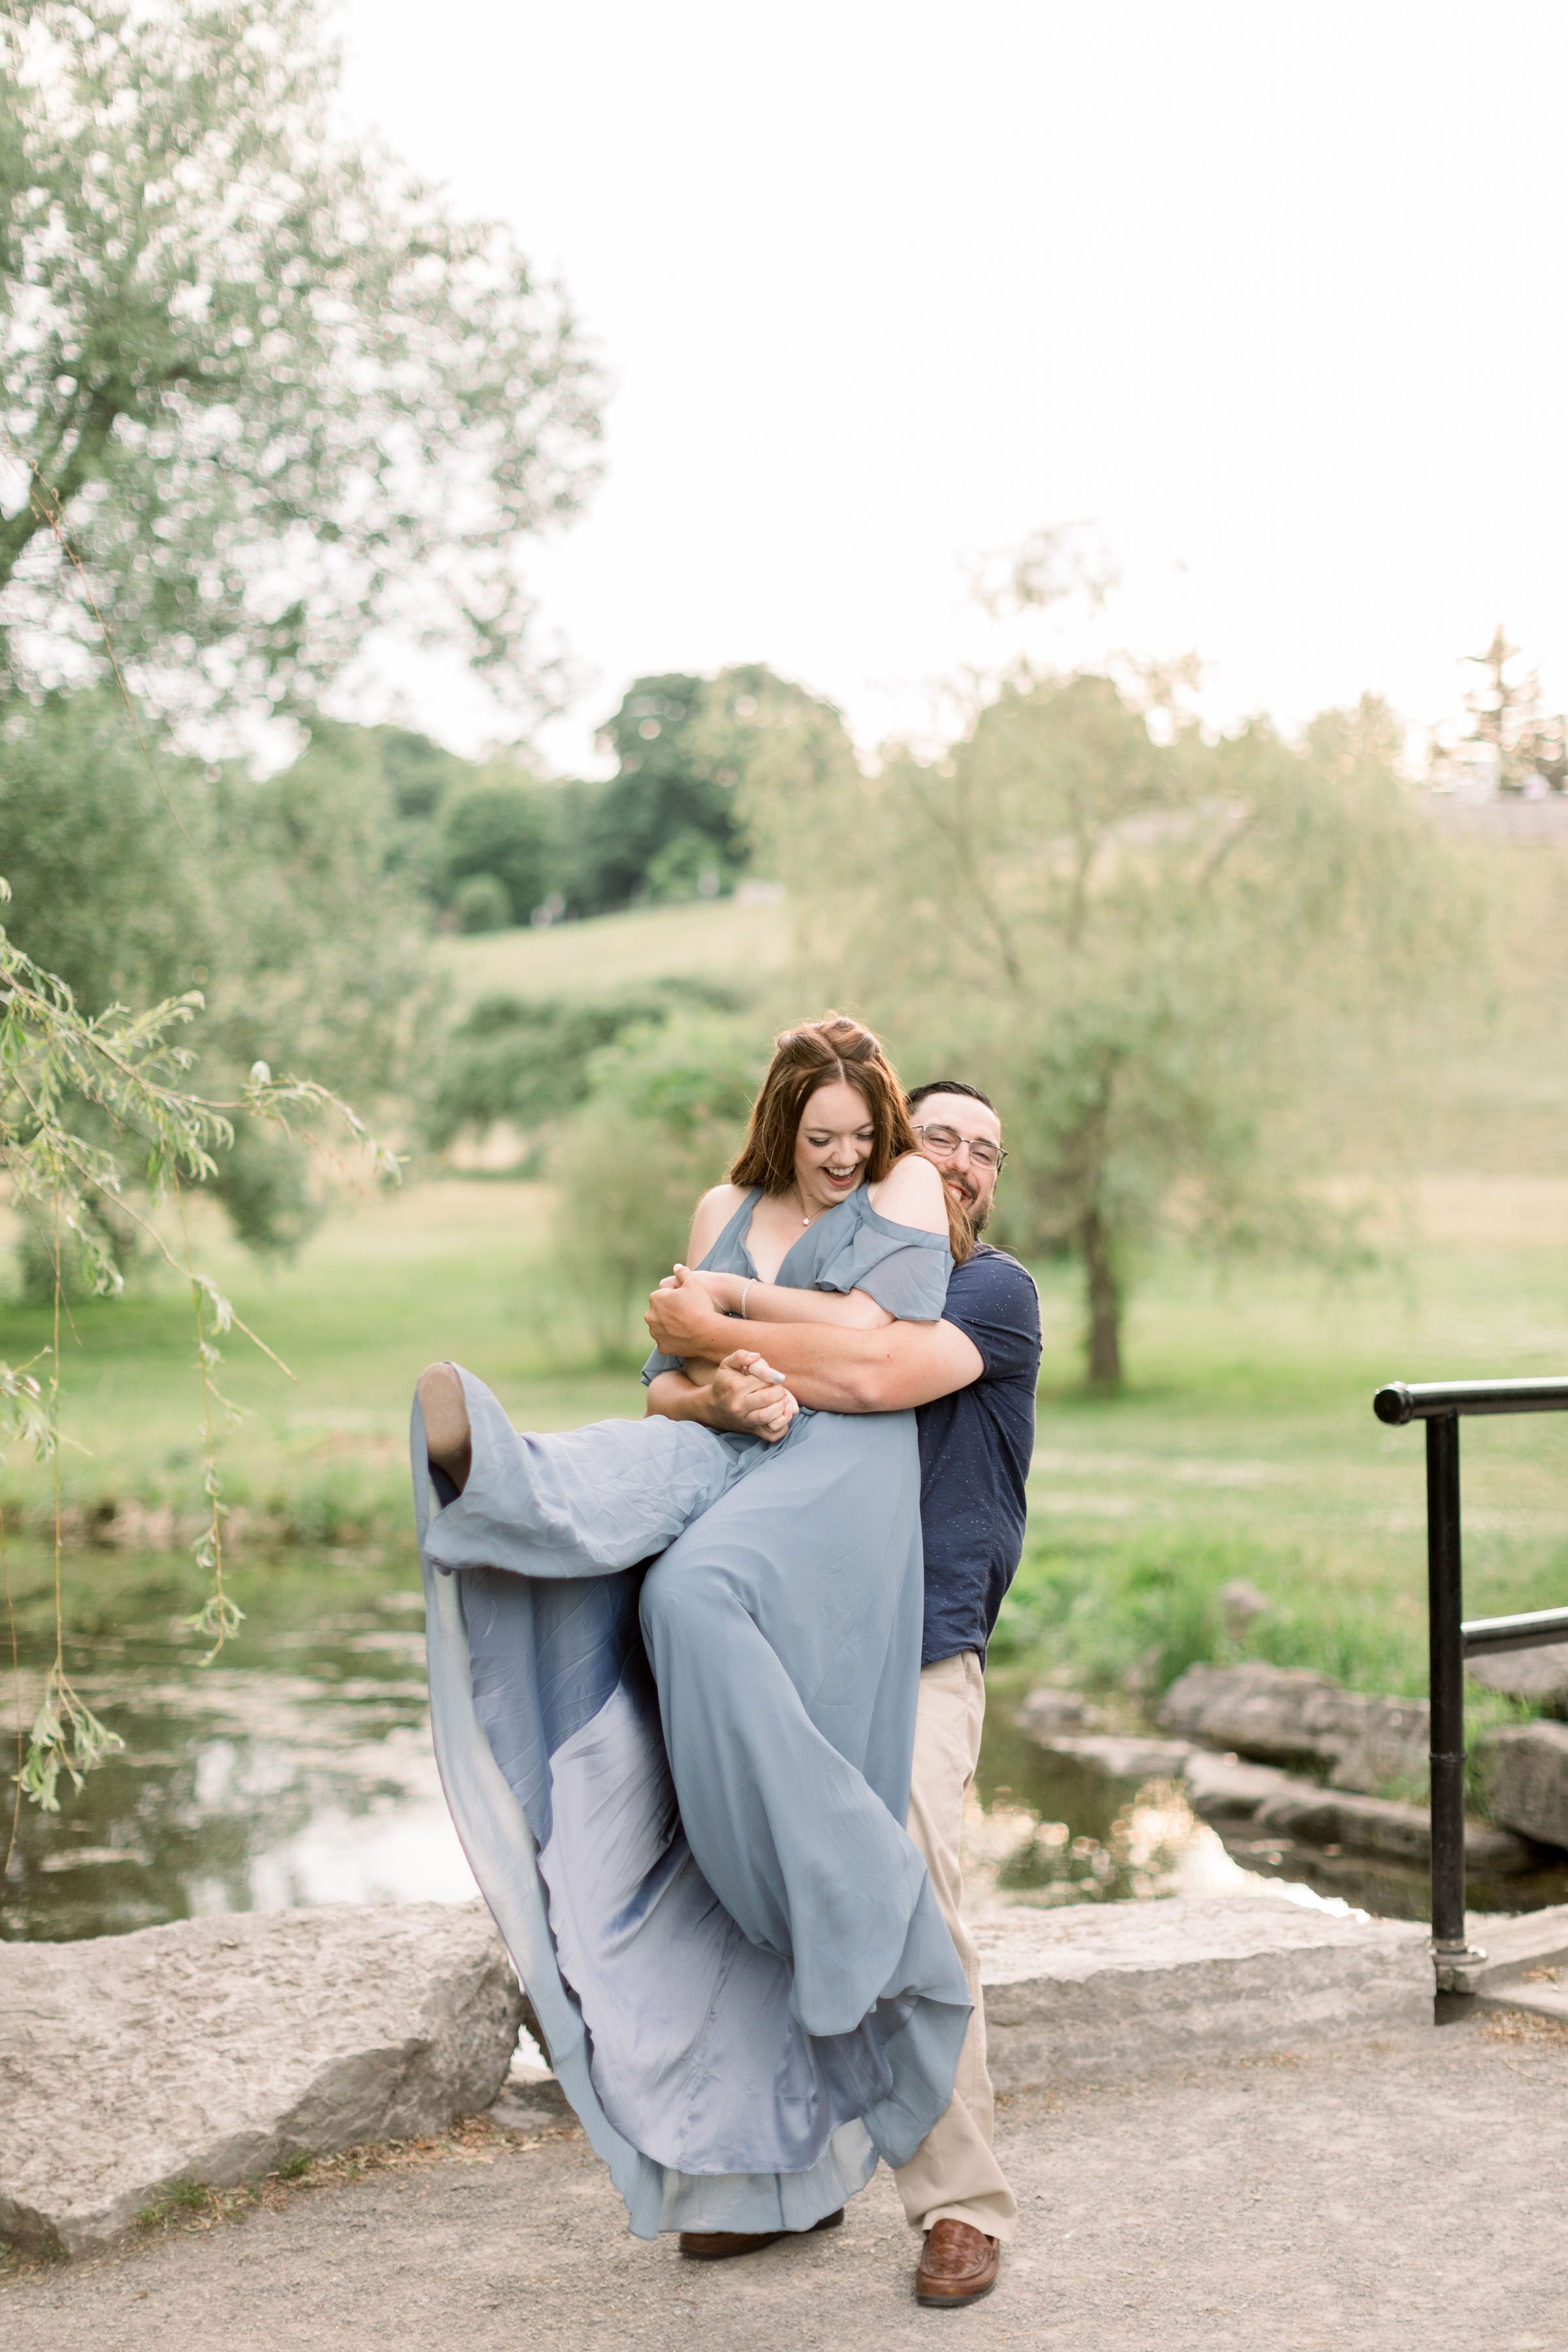  Ottawa engagement photographer Chelsea Mason Photography captures a woman being lifted up by her fiance as she laughs. candid engagement pics #chelseamasonphotography #chelseamasonengagements #Ottawaengagements #DominonArboretum #Ottawaphotographers